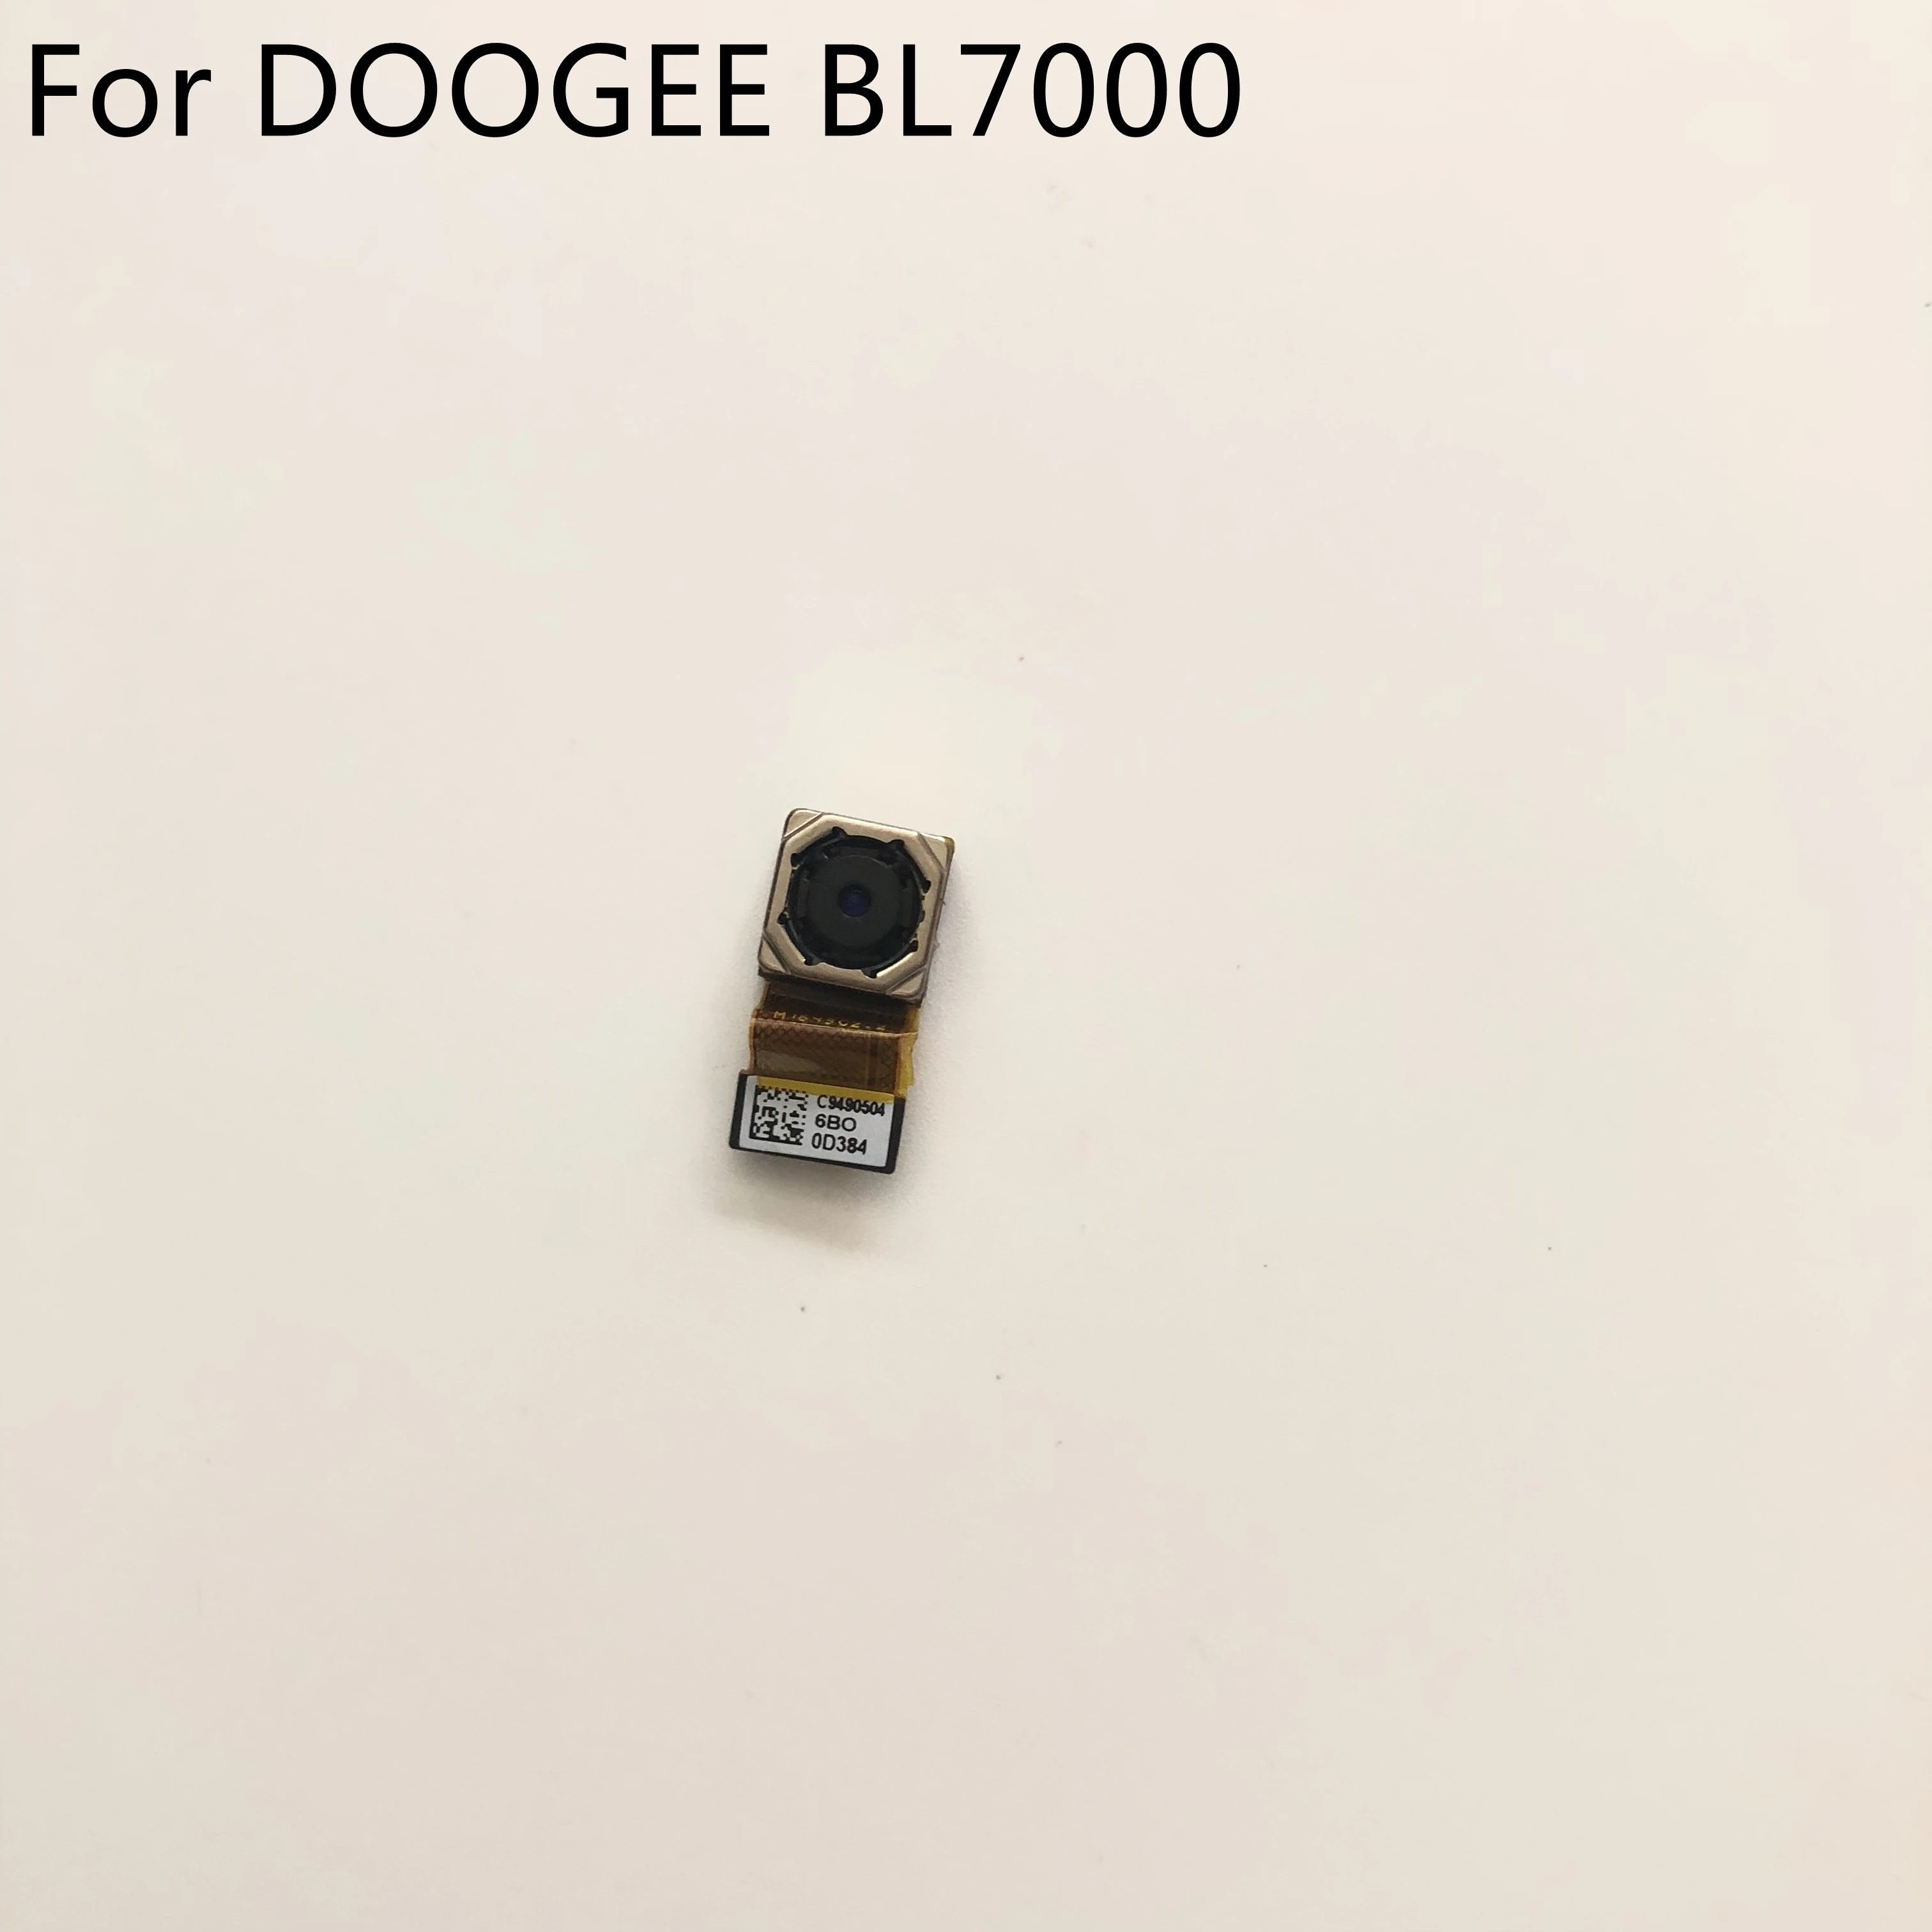 

Used Front Camera 13.0MP Module For DOOGEE BL7000 MTK6750T Octa Core 5.5'' FHD 1920x1080 Smartphone